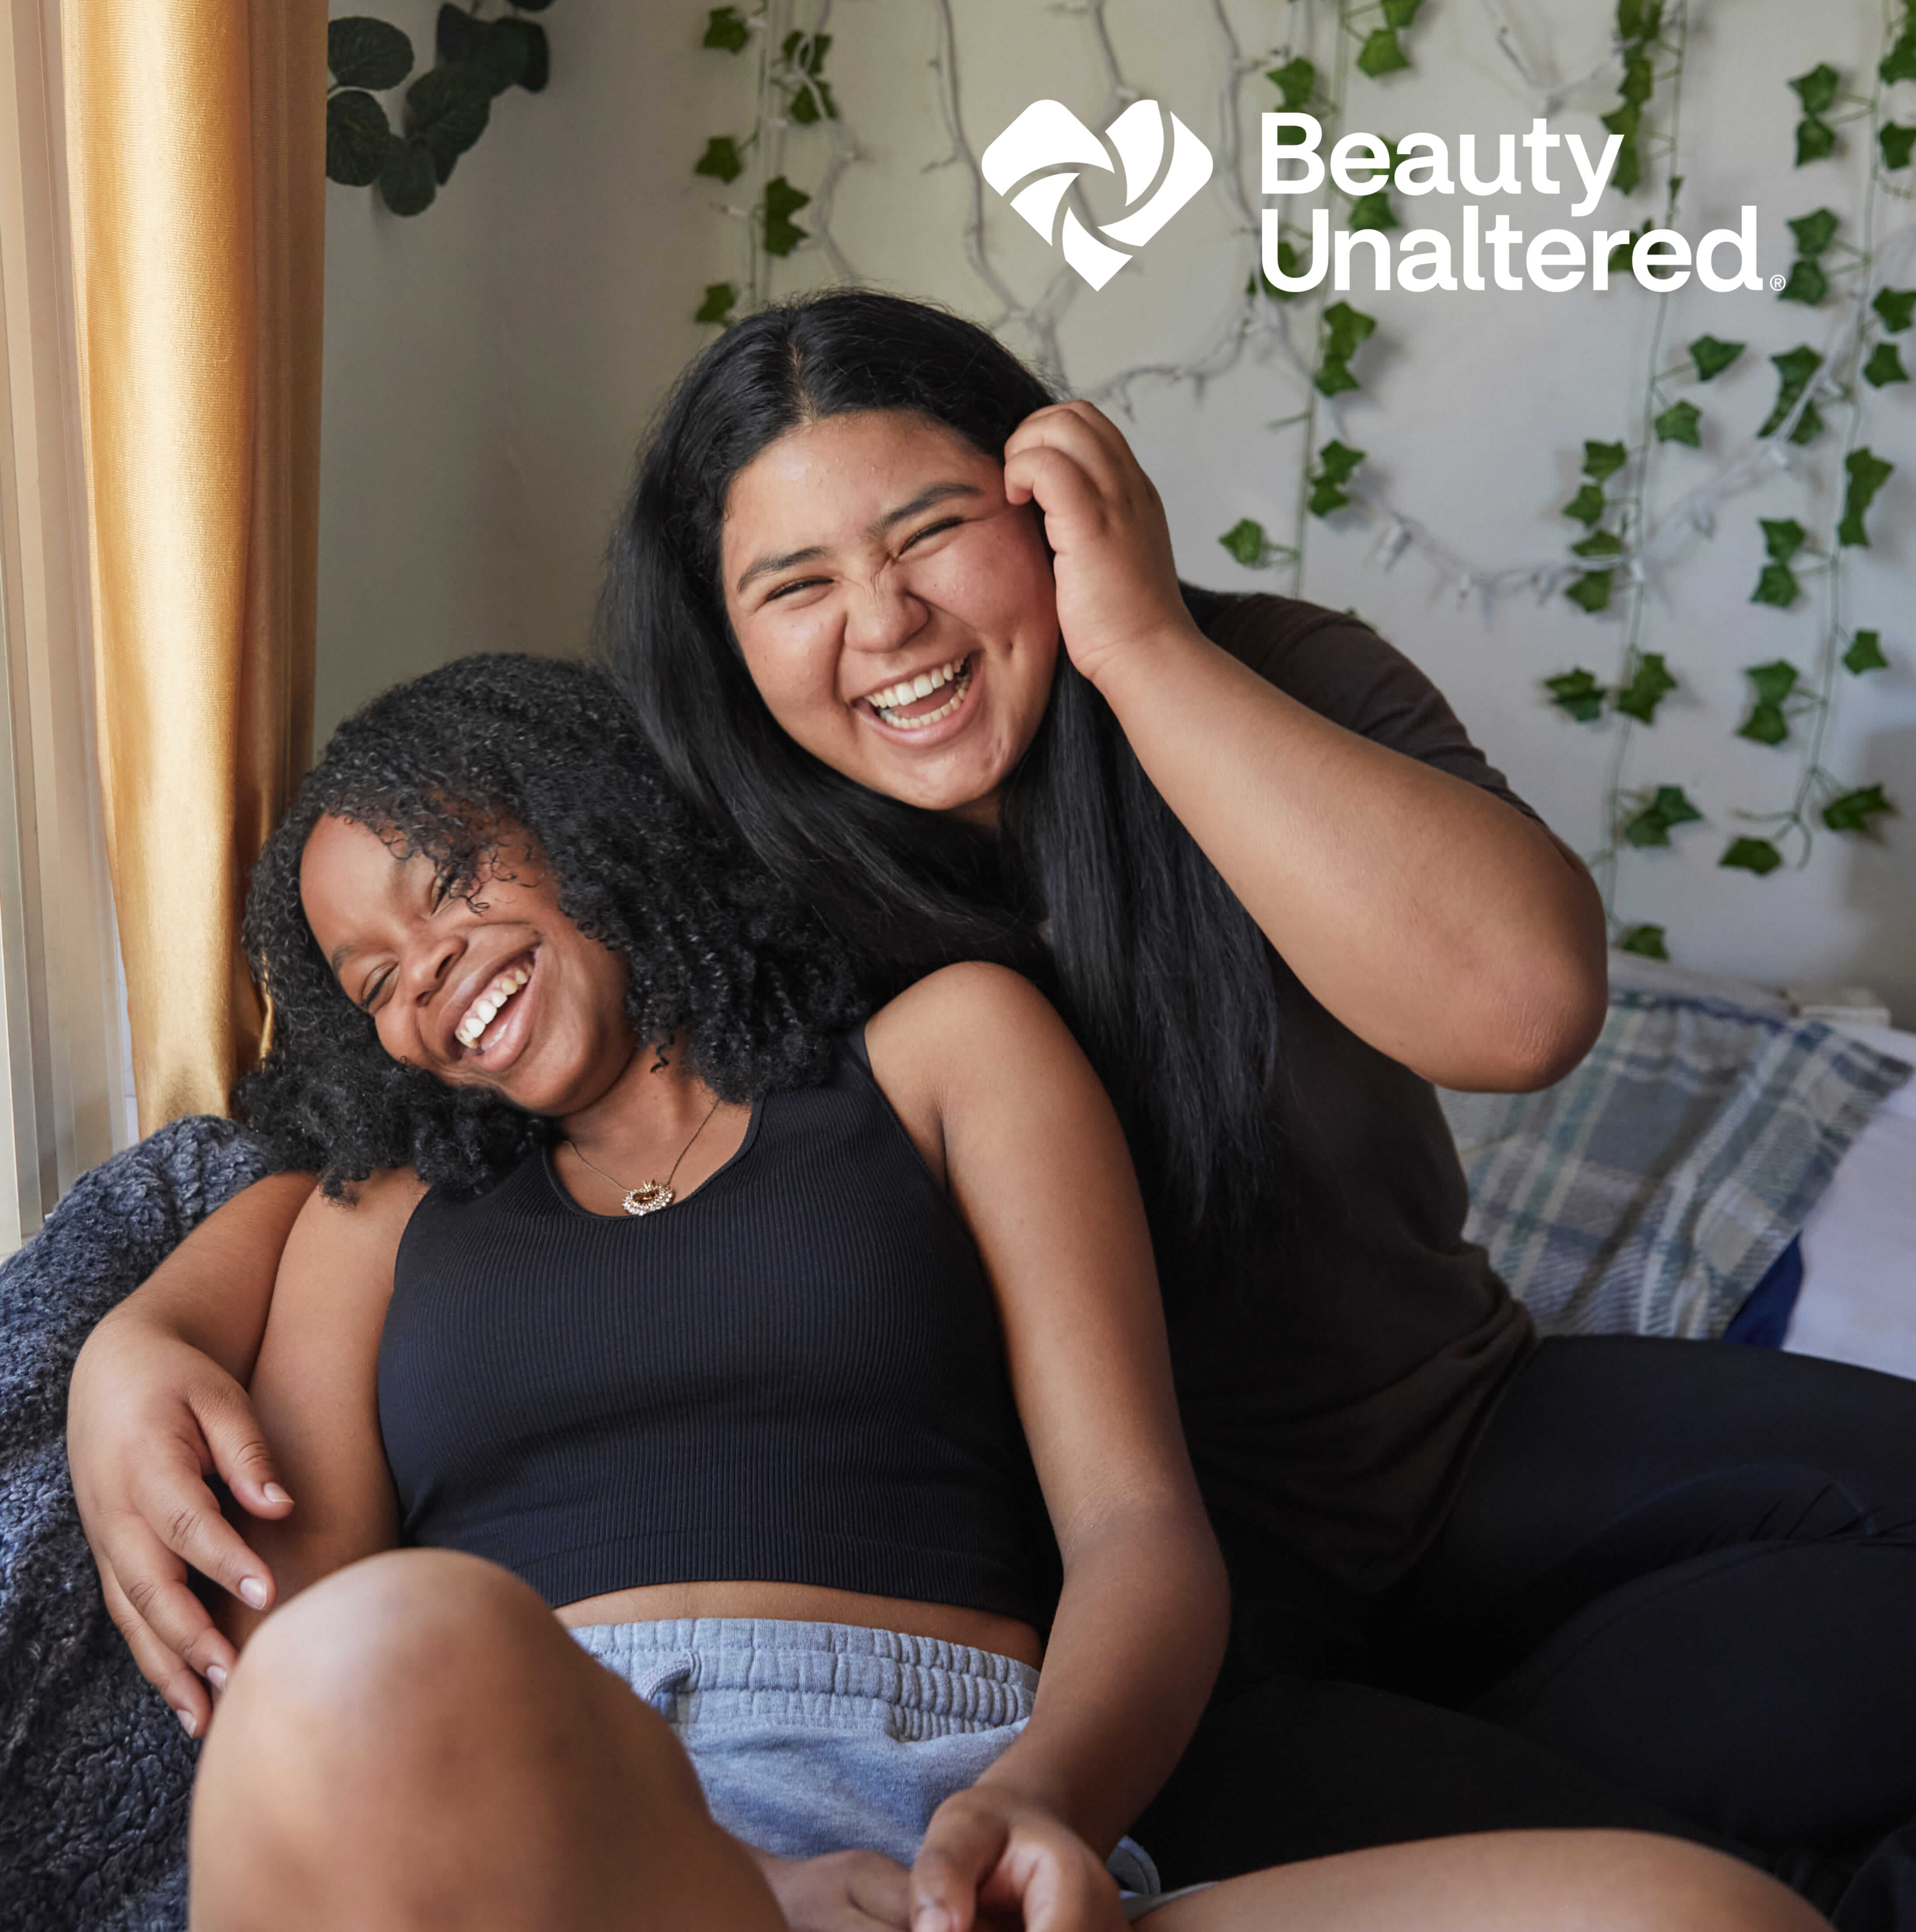 Two young naturally beautiful women of color hang out and laught together. The logo for beauty unaltered is shown.